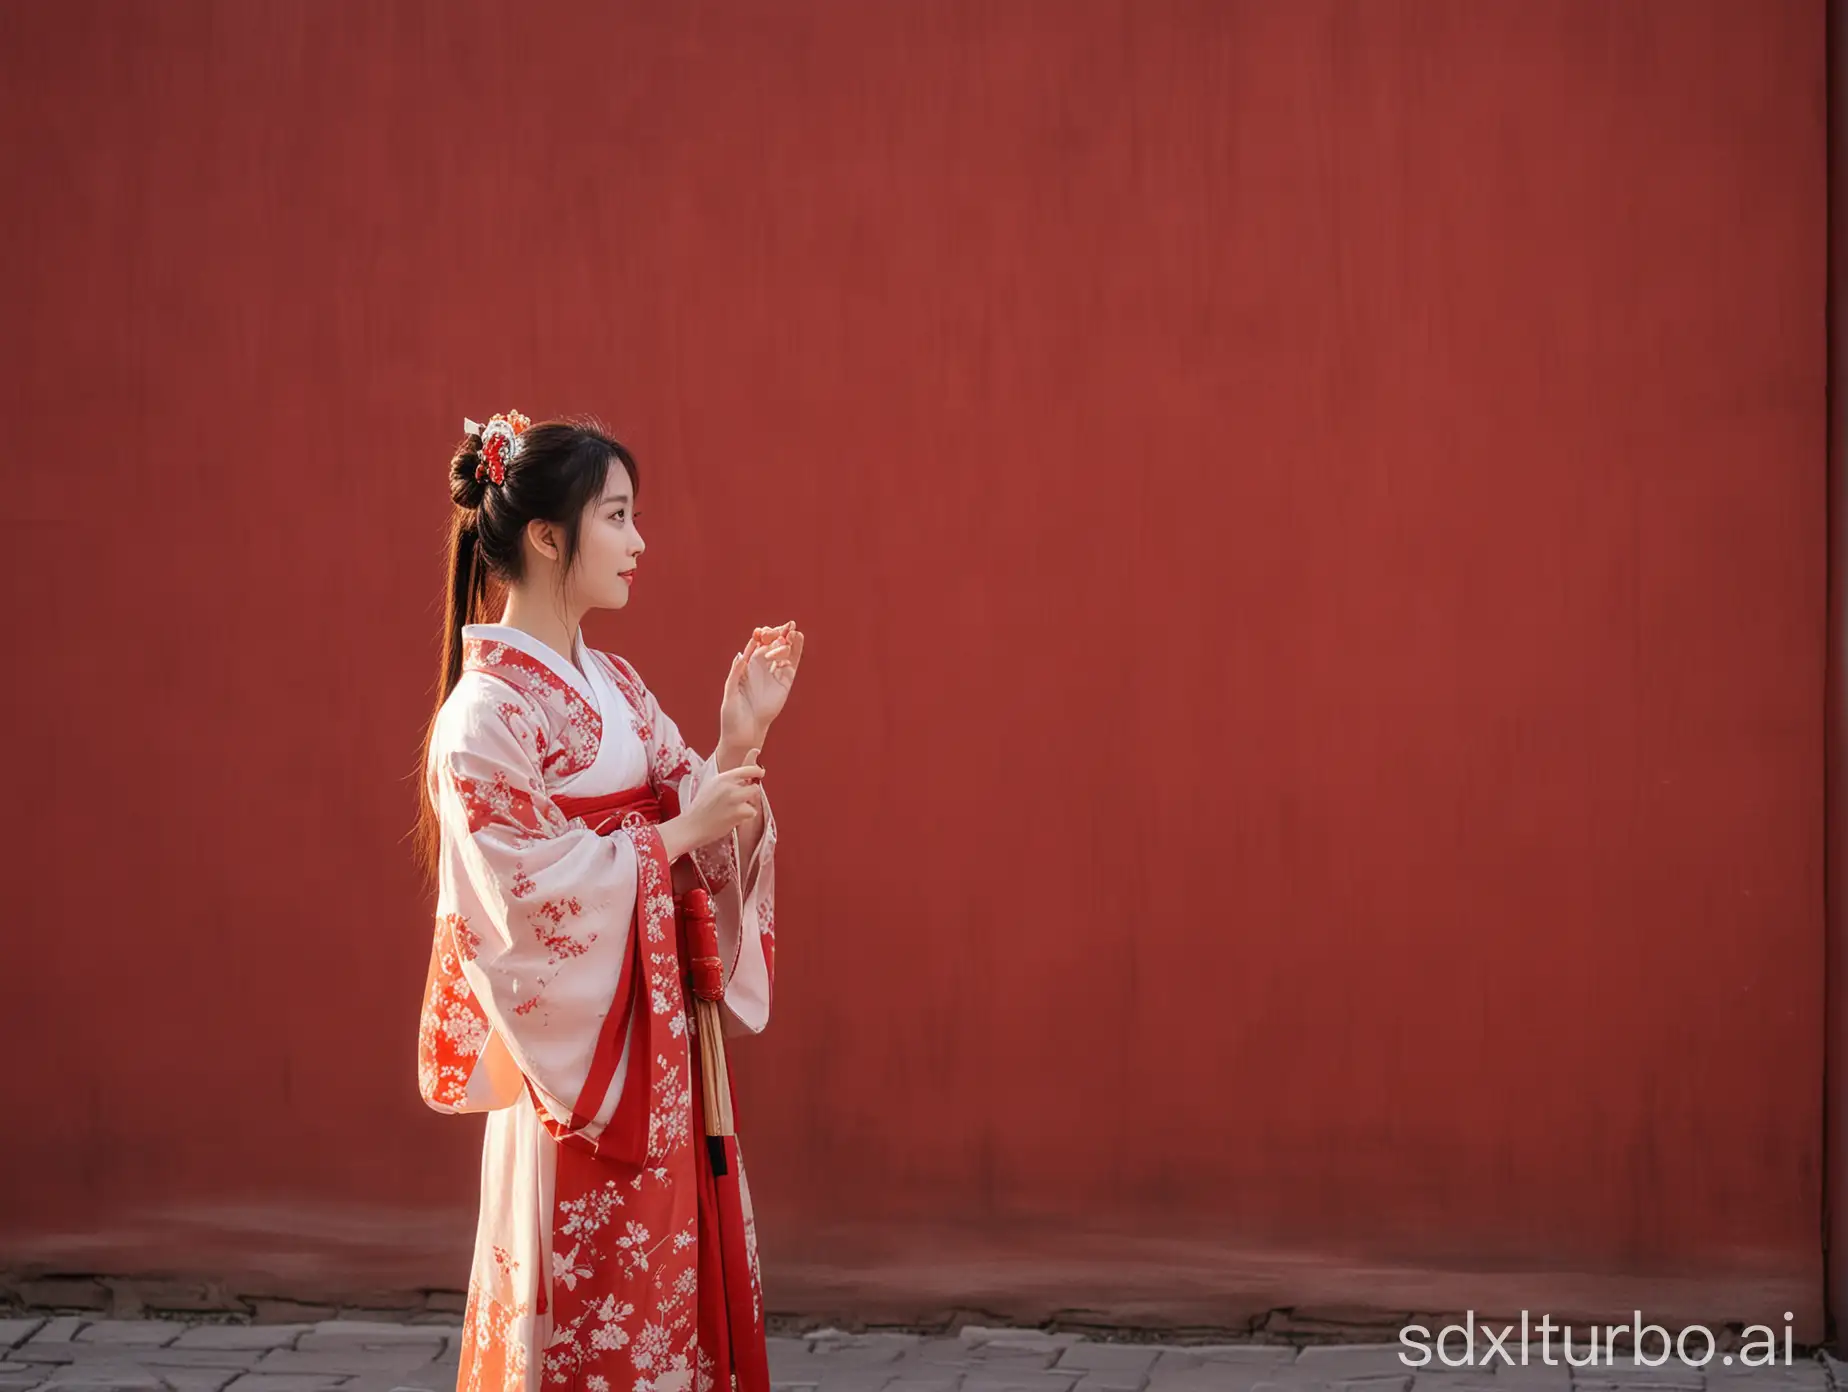 Hanfu-Photoshoot-at-Sunset-Elegant-Lady-Capturing-Moments-by-Red-Wall